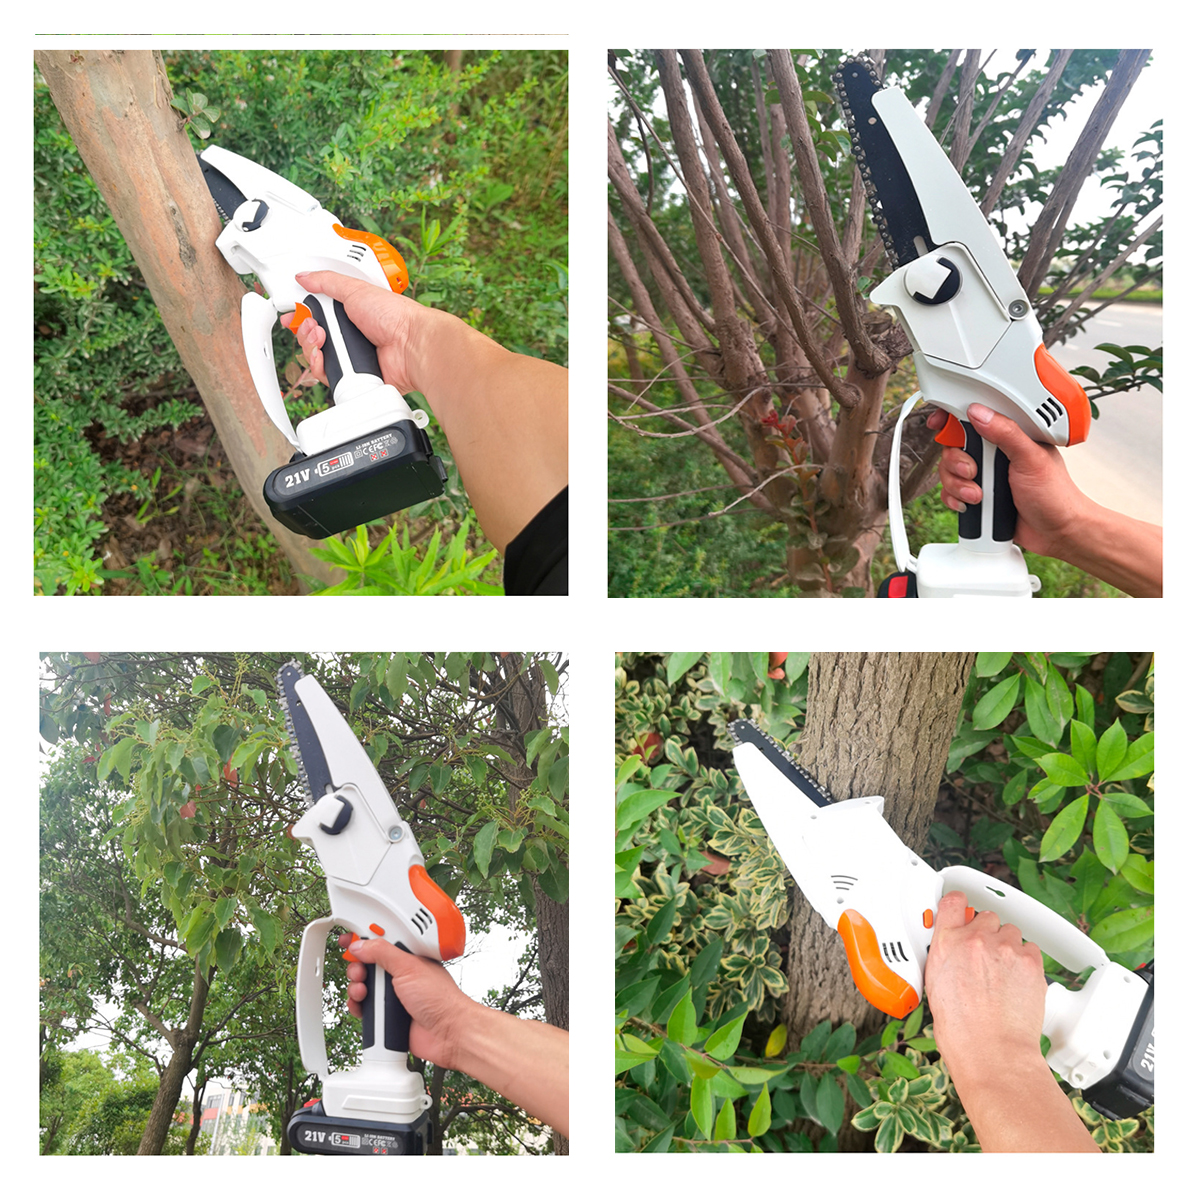 6-Inch-Portable-Electric-Chain-Saw-Mini-Cordless-Rechargeable-Woodworking-Wood-Cutting-Tool-W-12-Bat-1886164-13